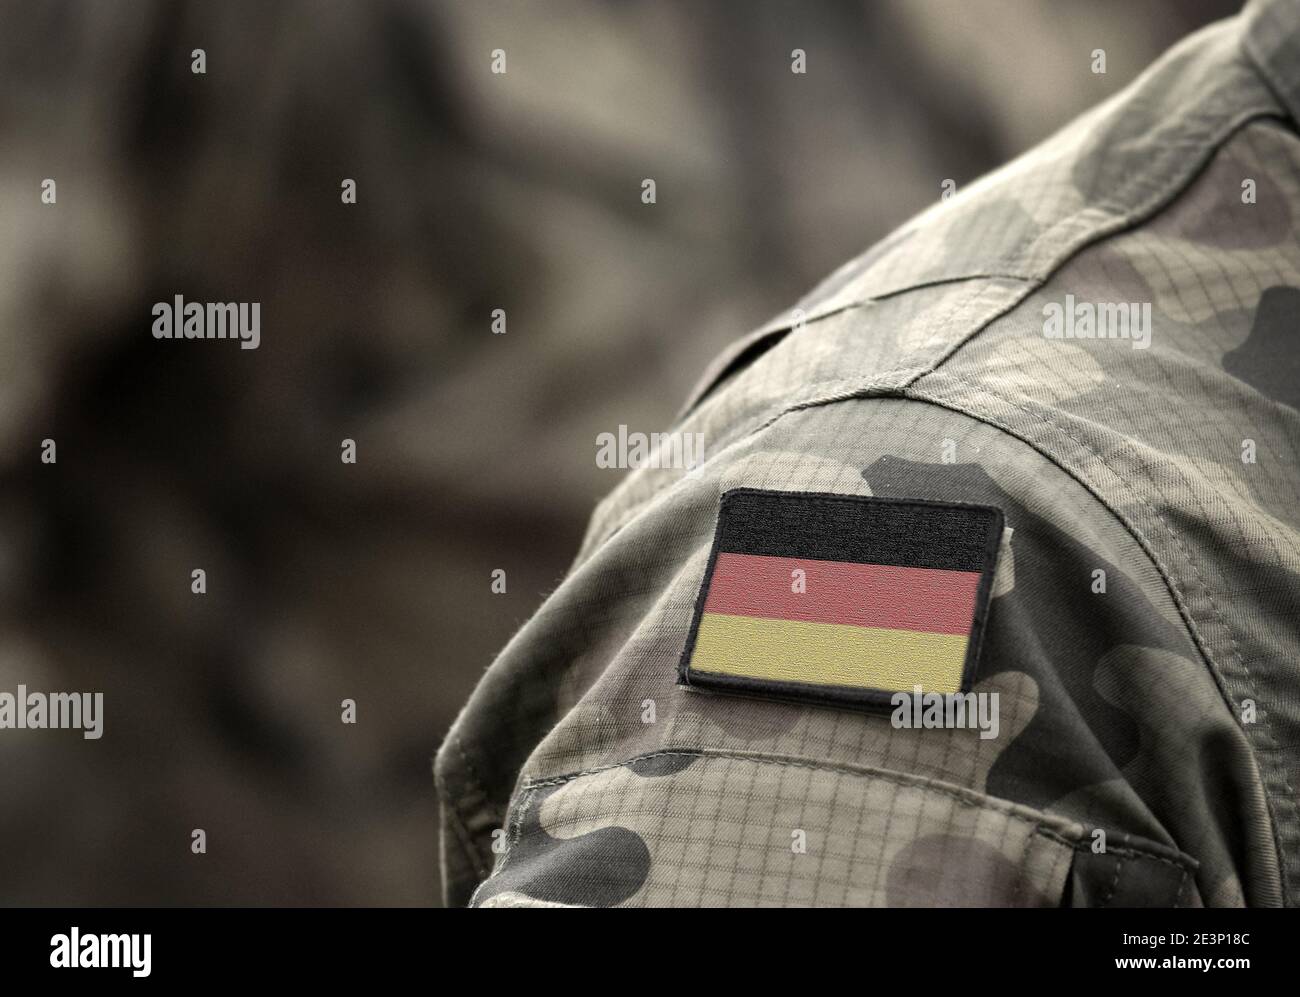 Flag of Germany on military uniform. Army, armed forces, soldiers. Collage. Stock Photo